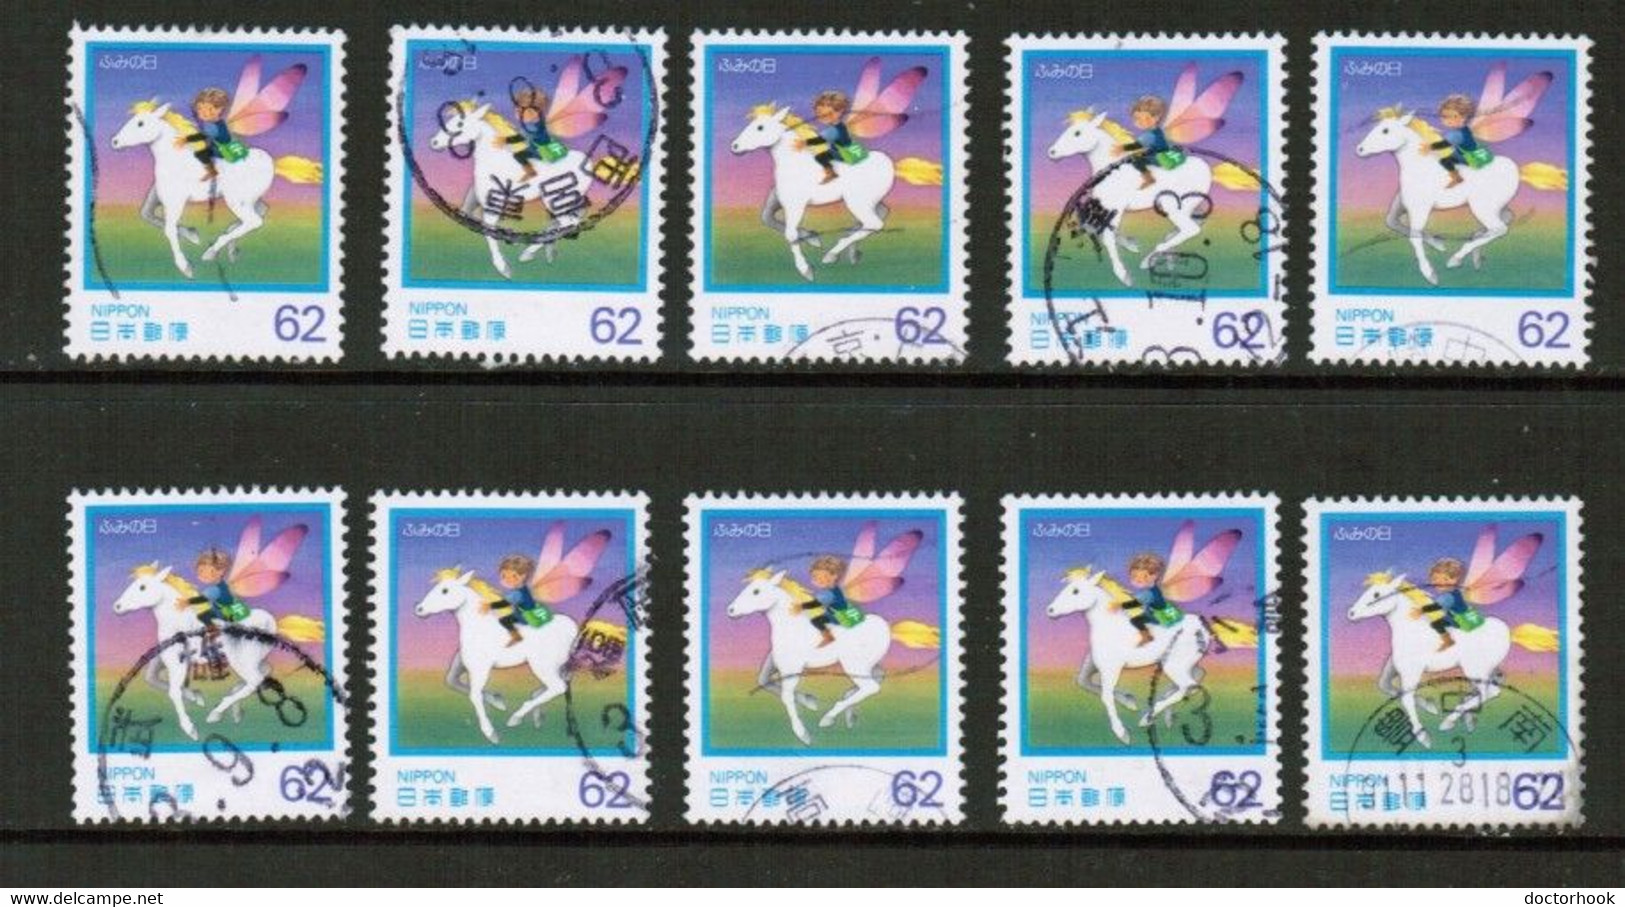 JAPAN   Scott # 2117 USED WHOLESALE LOT OF 10 (CONDITION AS PER SCAN) (WH-590) - Colecciones & Series